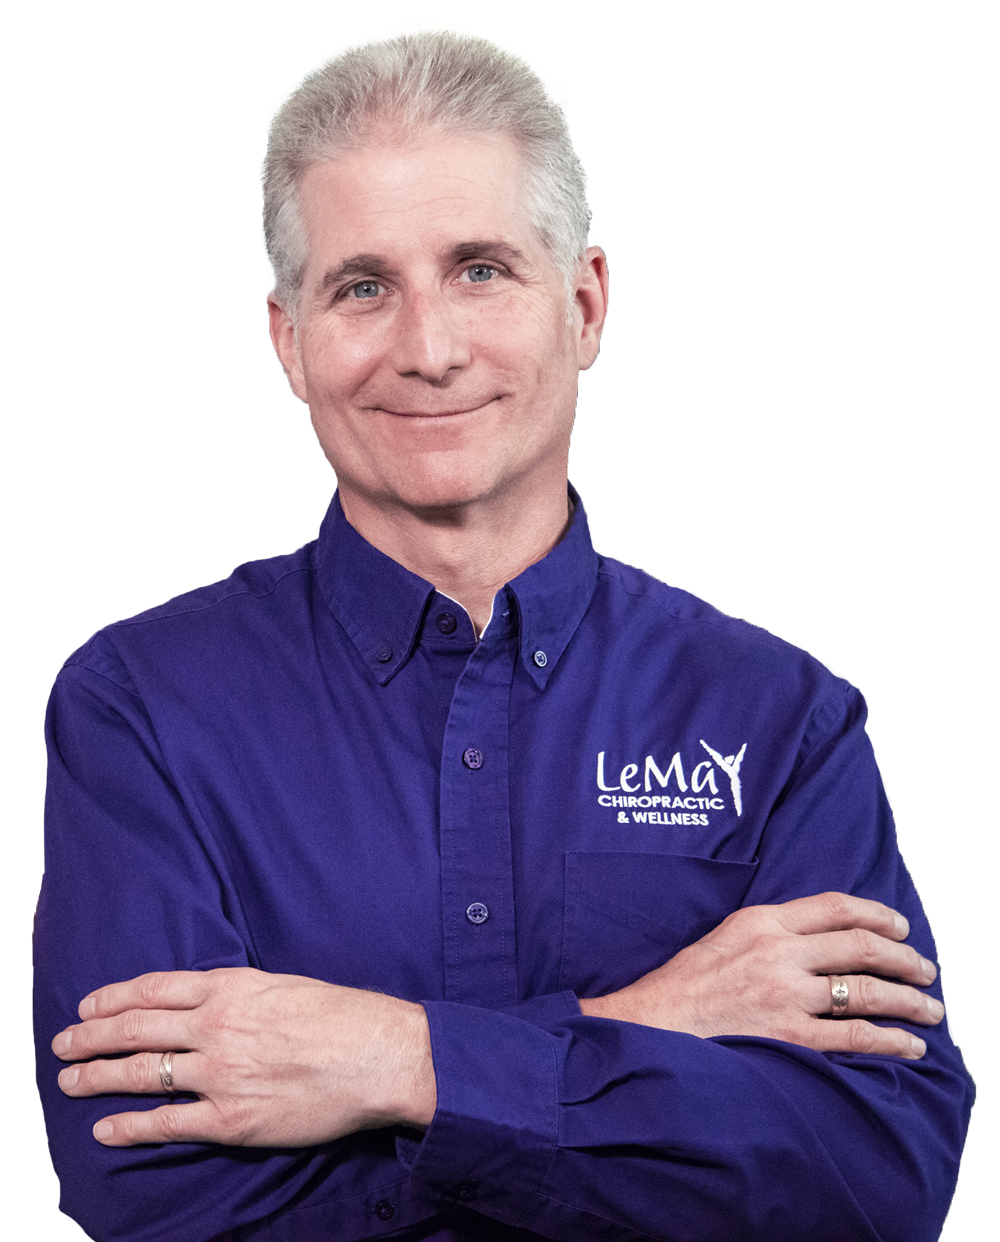 Dr. Mark Lemay